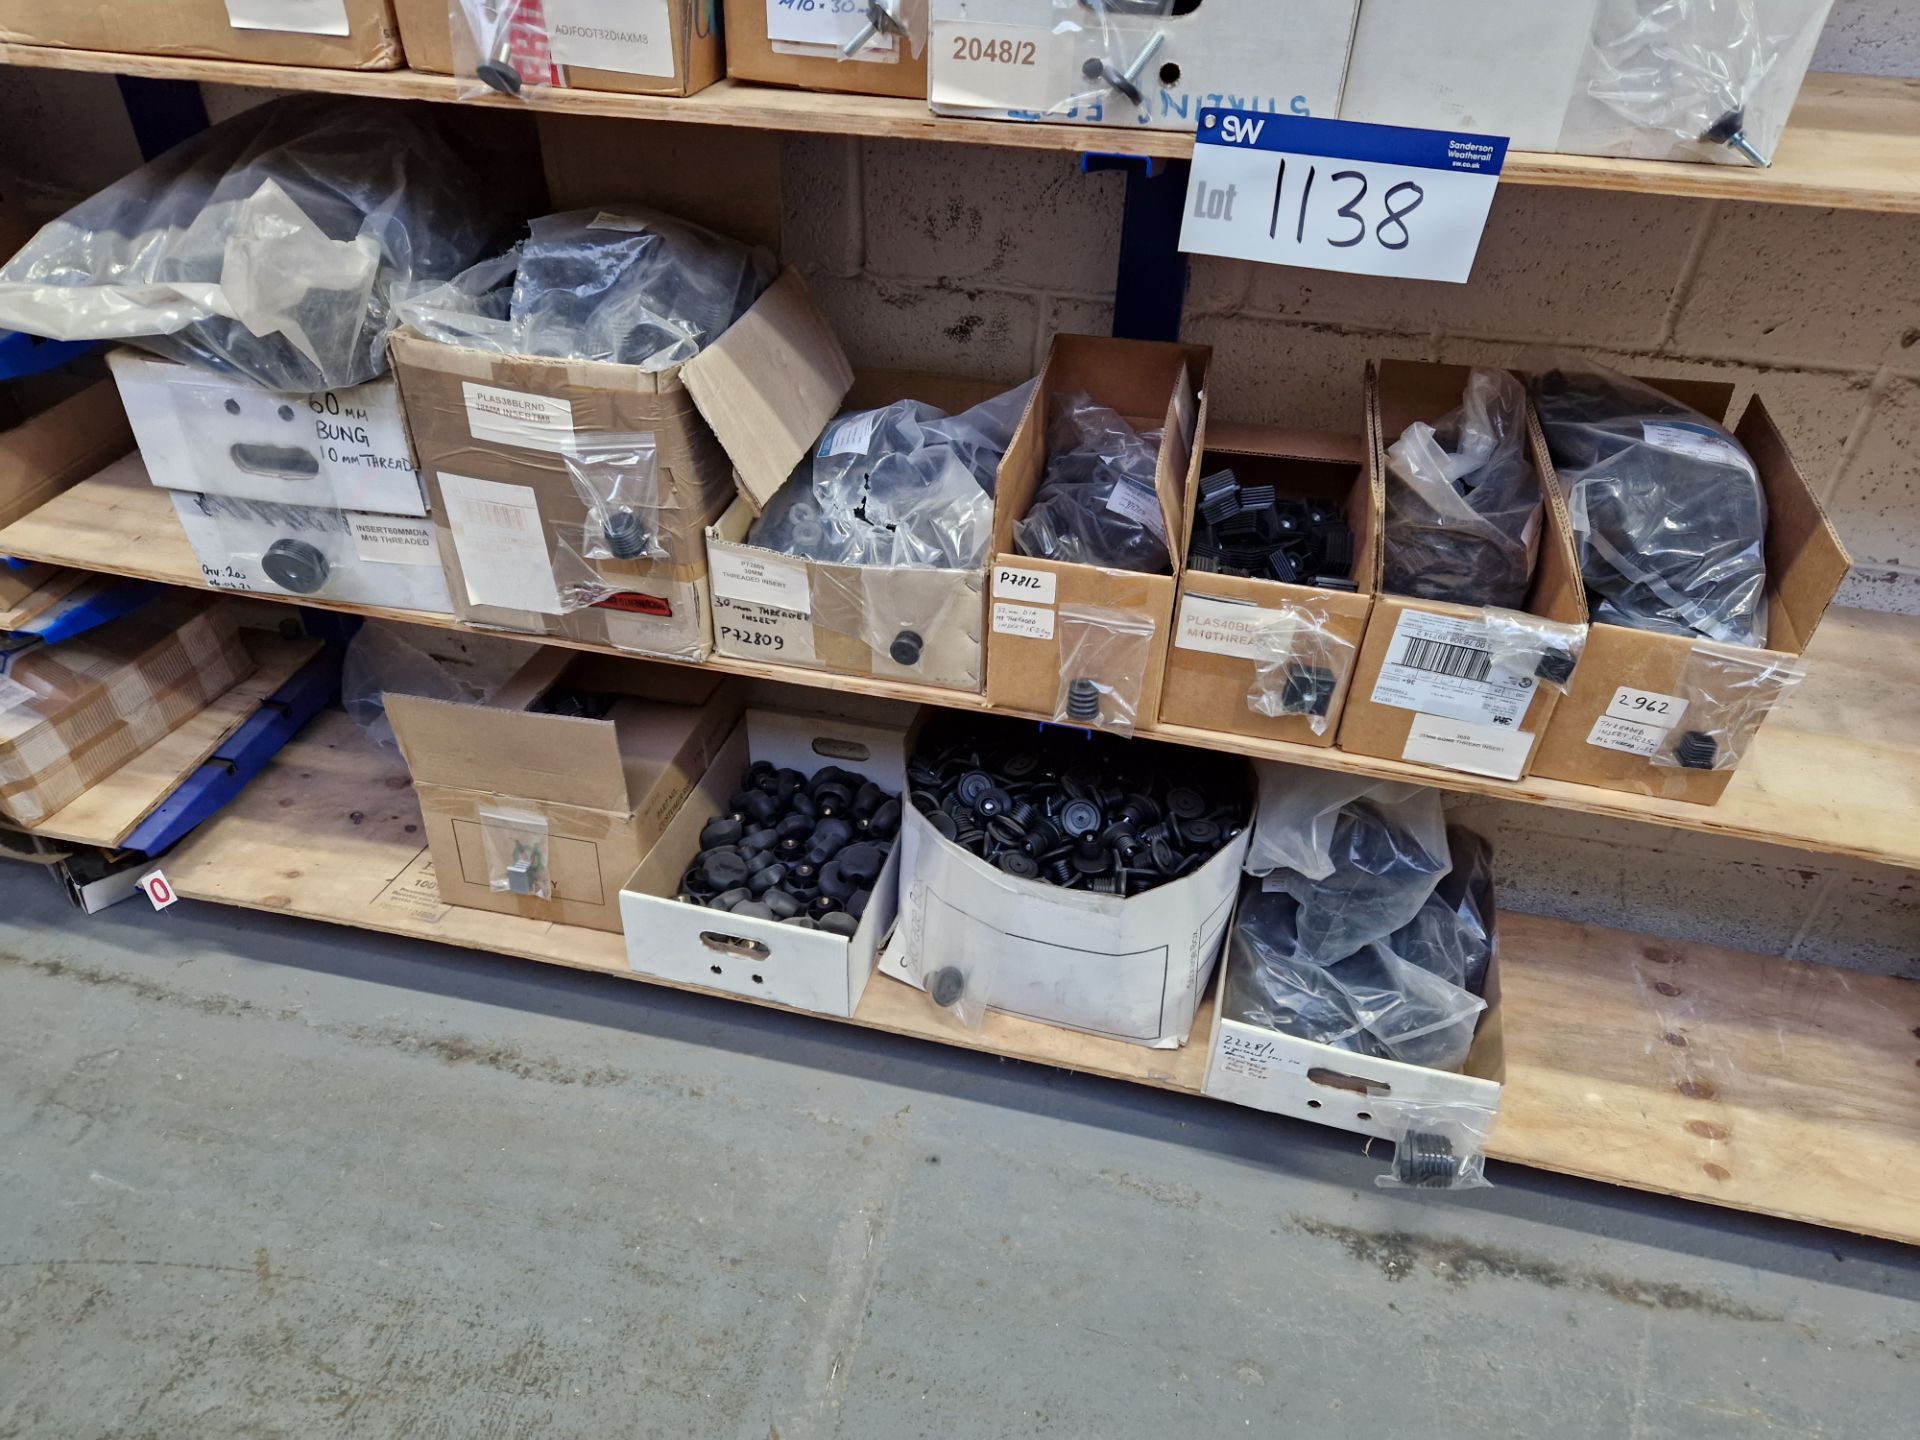 Quantity of Fixtures and Fittings, including Inserts, End Caps, Dust Covers, Tilting Wheel Supports, - Image 2 of 4